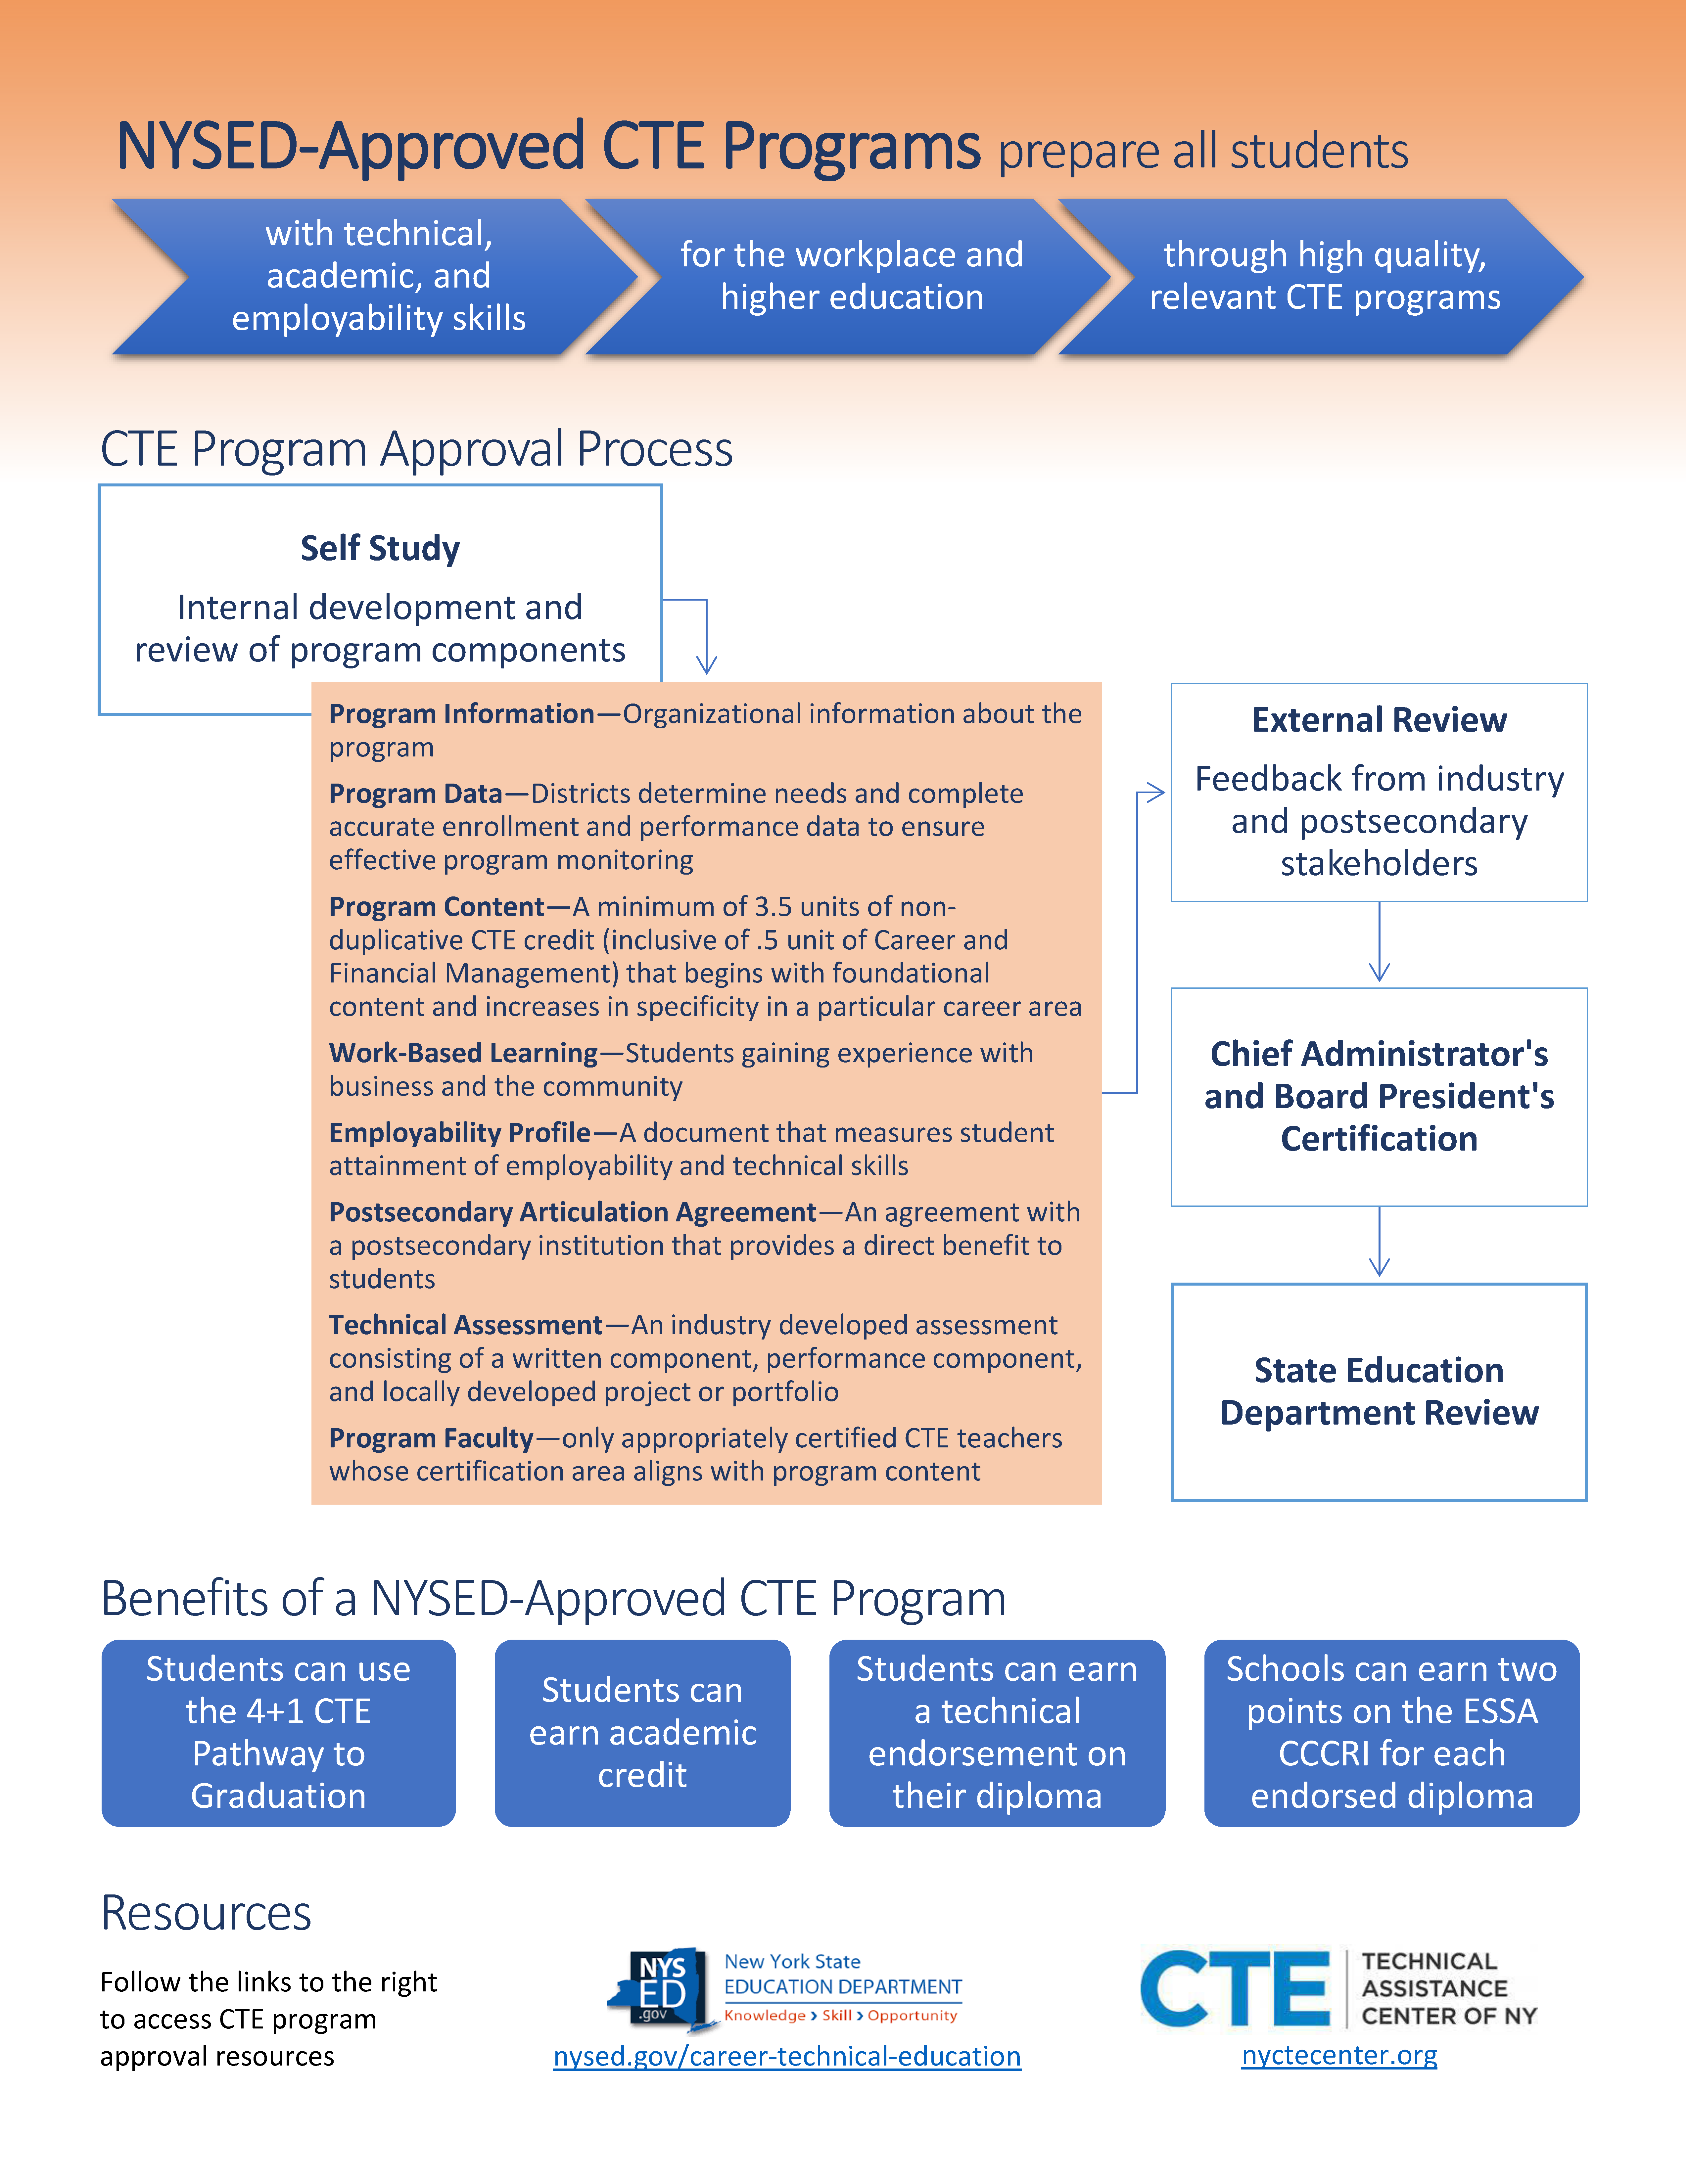 Image of a NYSED-approved CTE program flyer